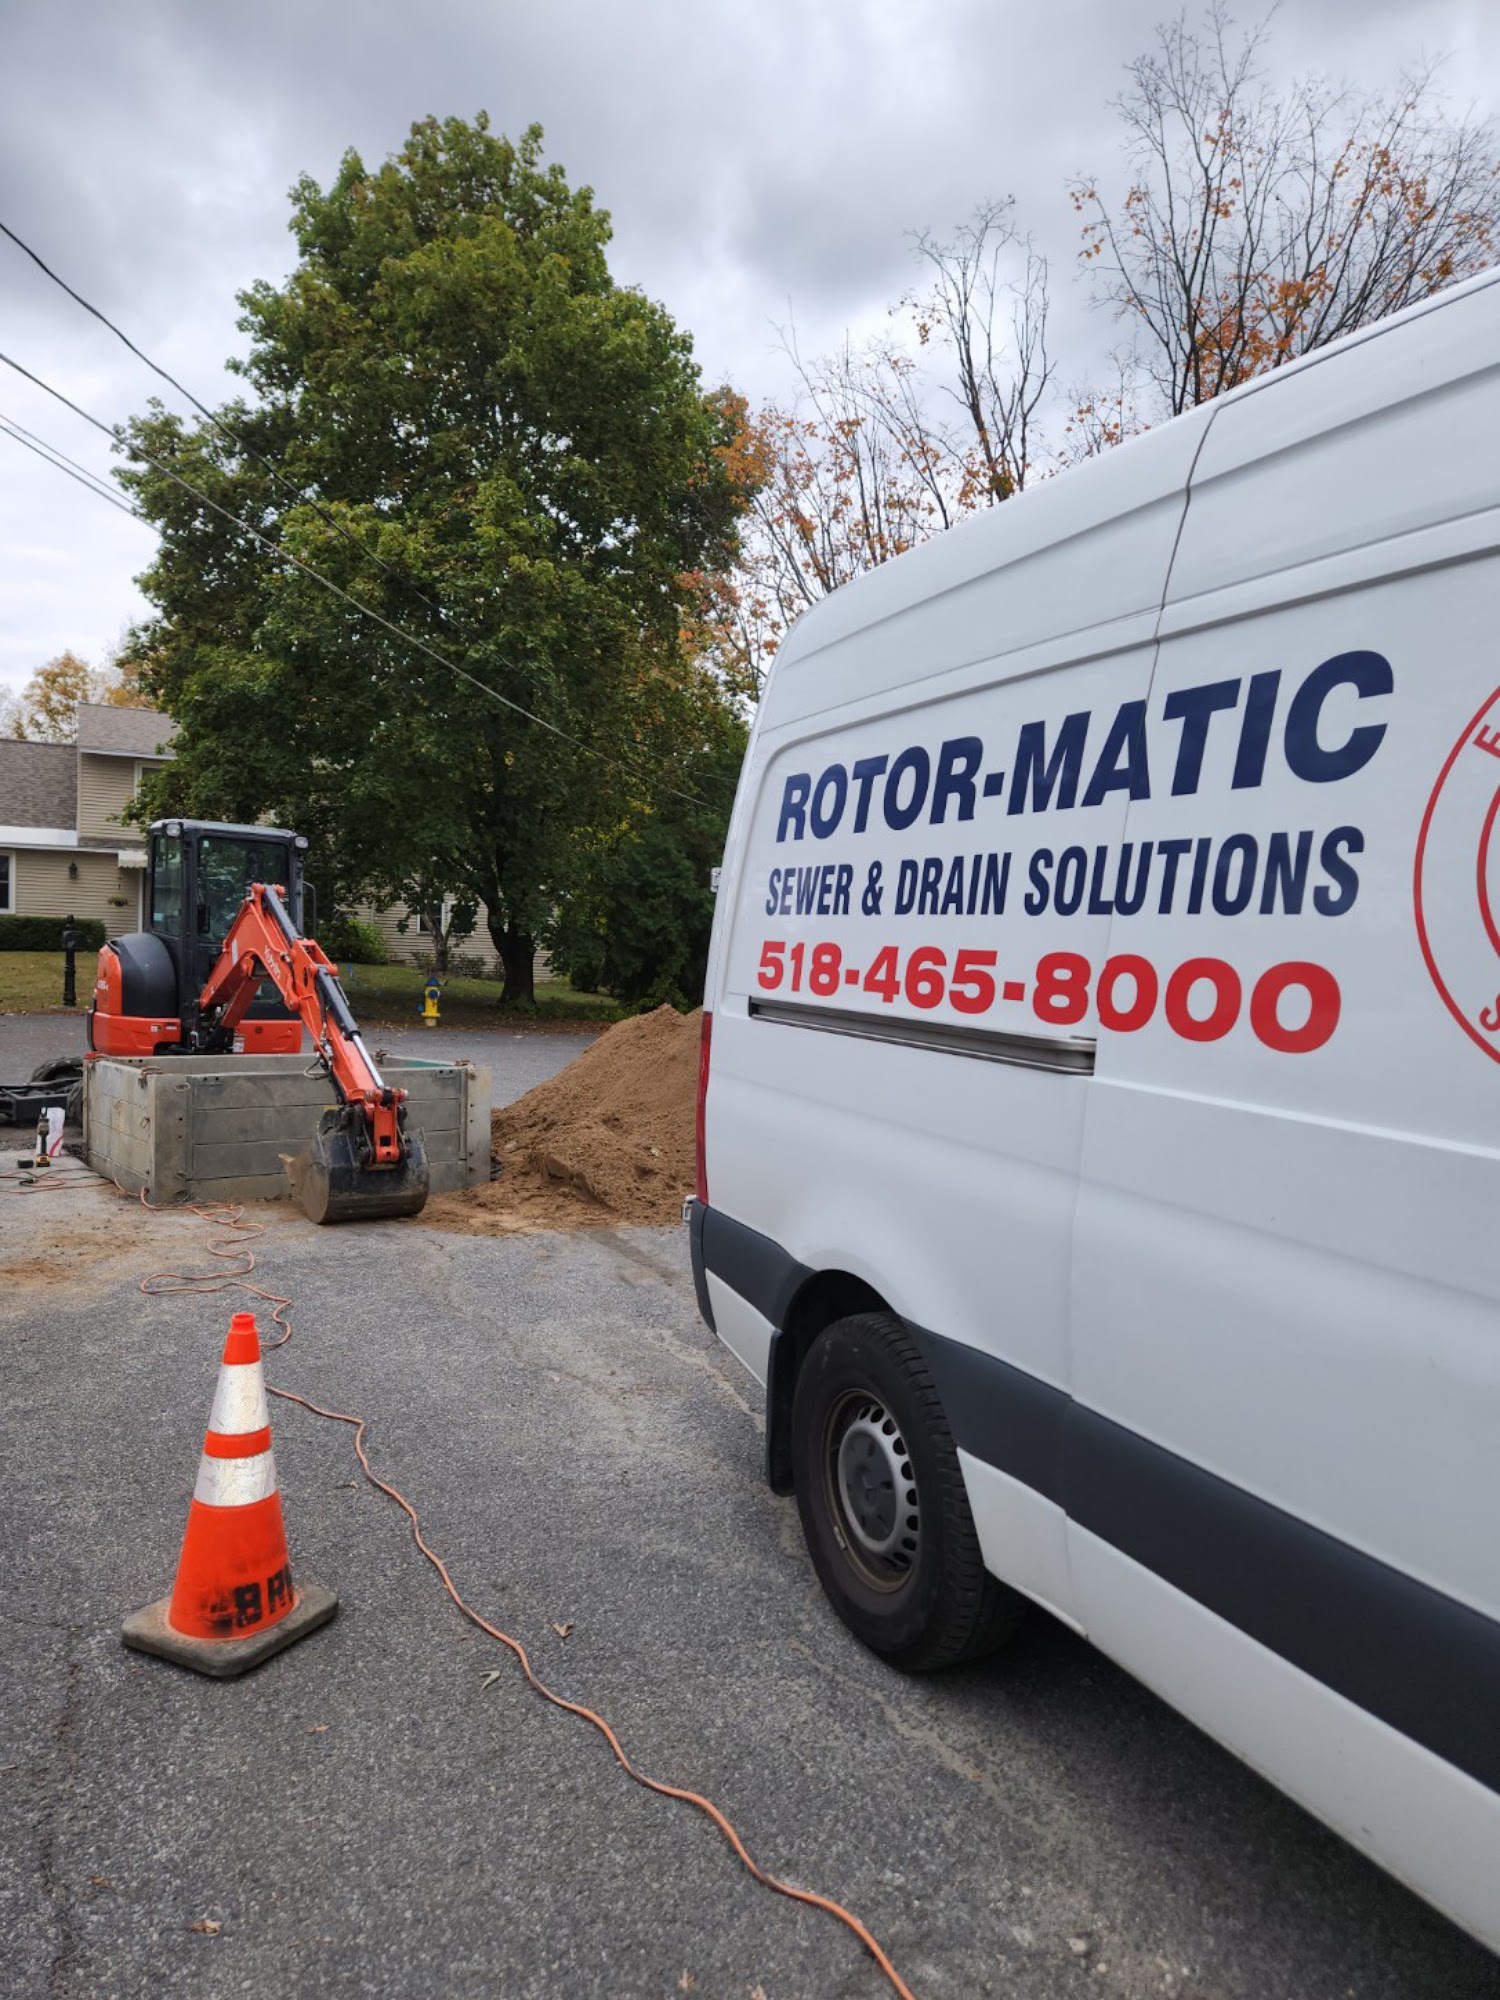 Rotor-Matic Sewer & Drain Solutions - Drain Cleaning